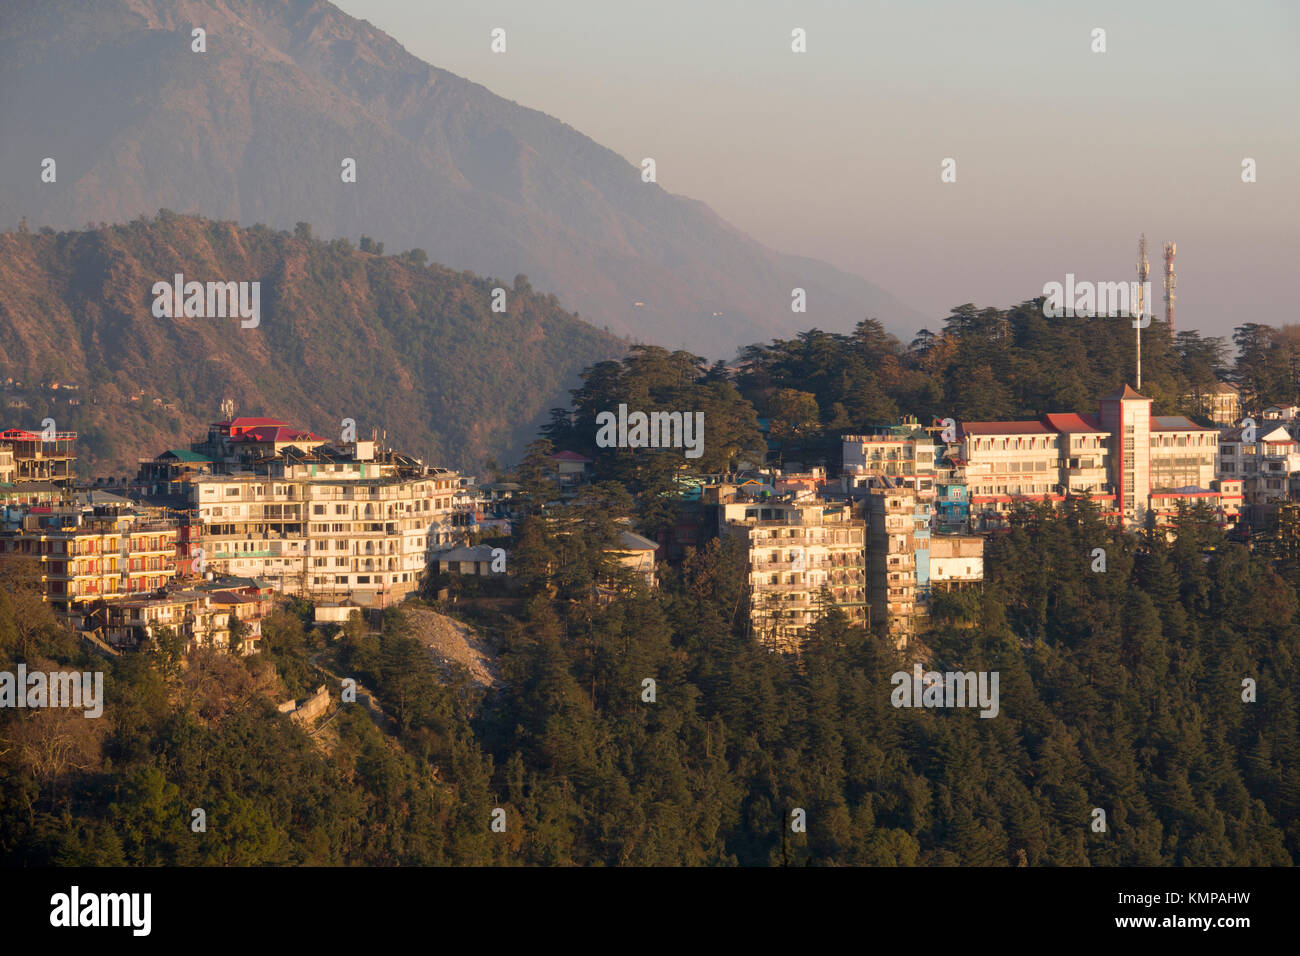 View of Mcleod Ganj in the mountains above Dharamshala, India Stock Photo